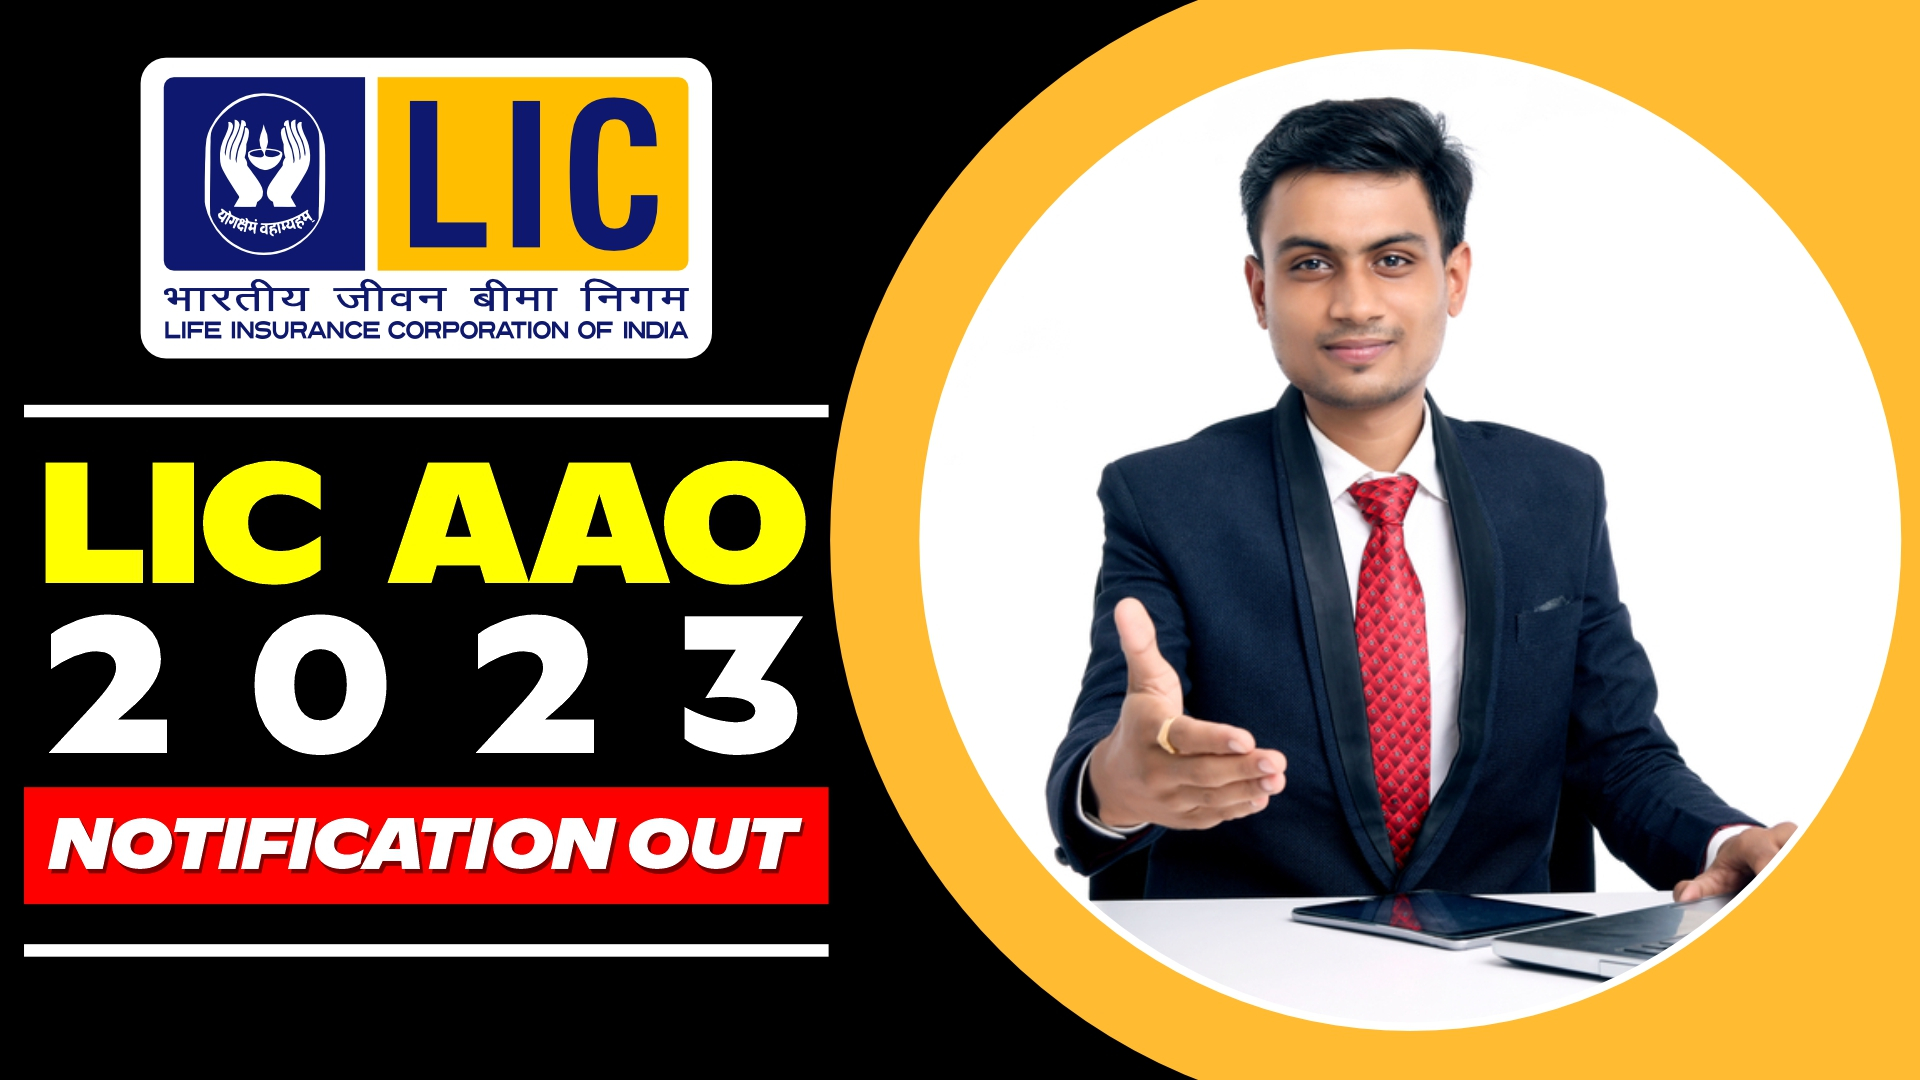 LIC AAO 2023 Notification, Exam Date, Eligibility, Important Dates, Exam Pattern & Syllabus, Selection Process